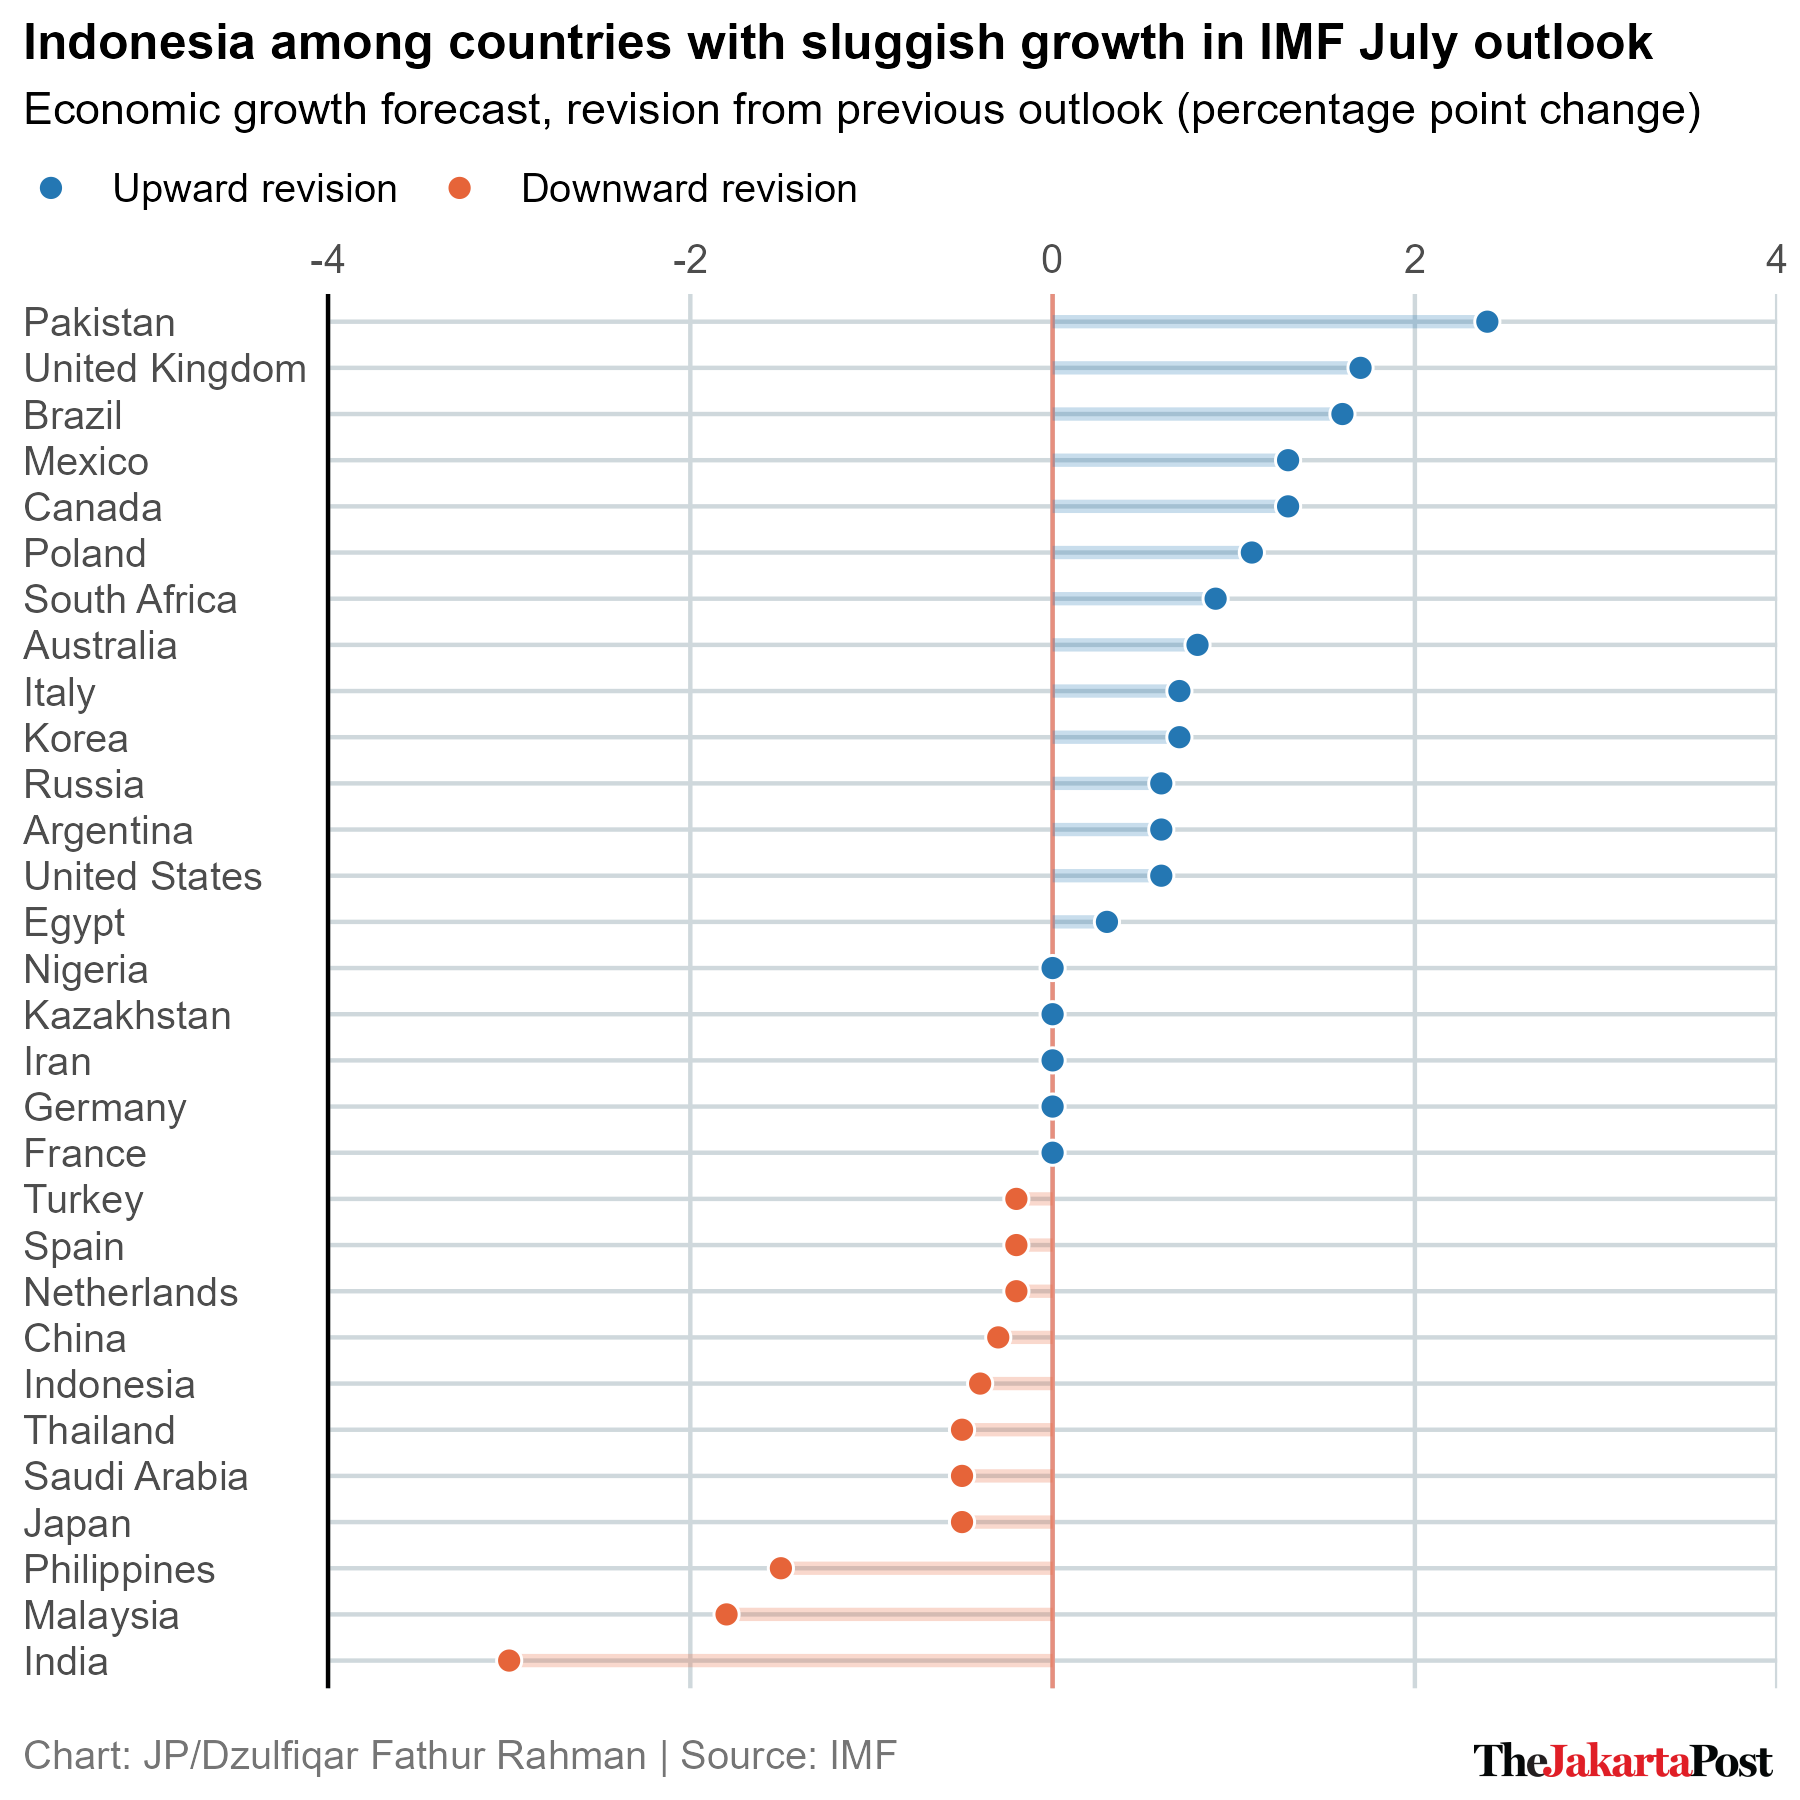 A chart showing the latest revision in the International Monetary Fund's July outlook. Indonesia got a 0.4 percentage point downward revision.